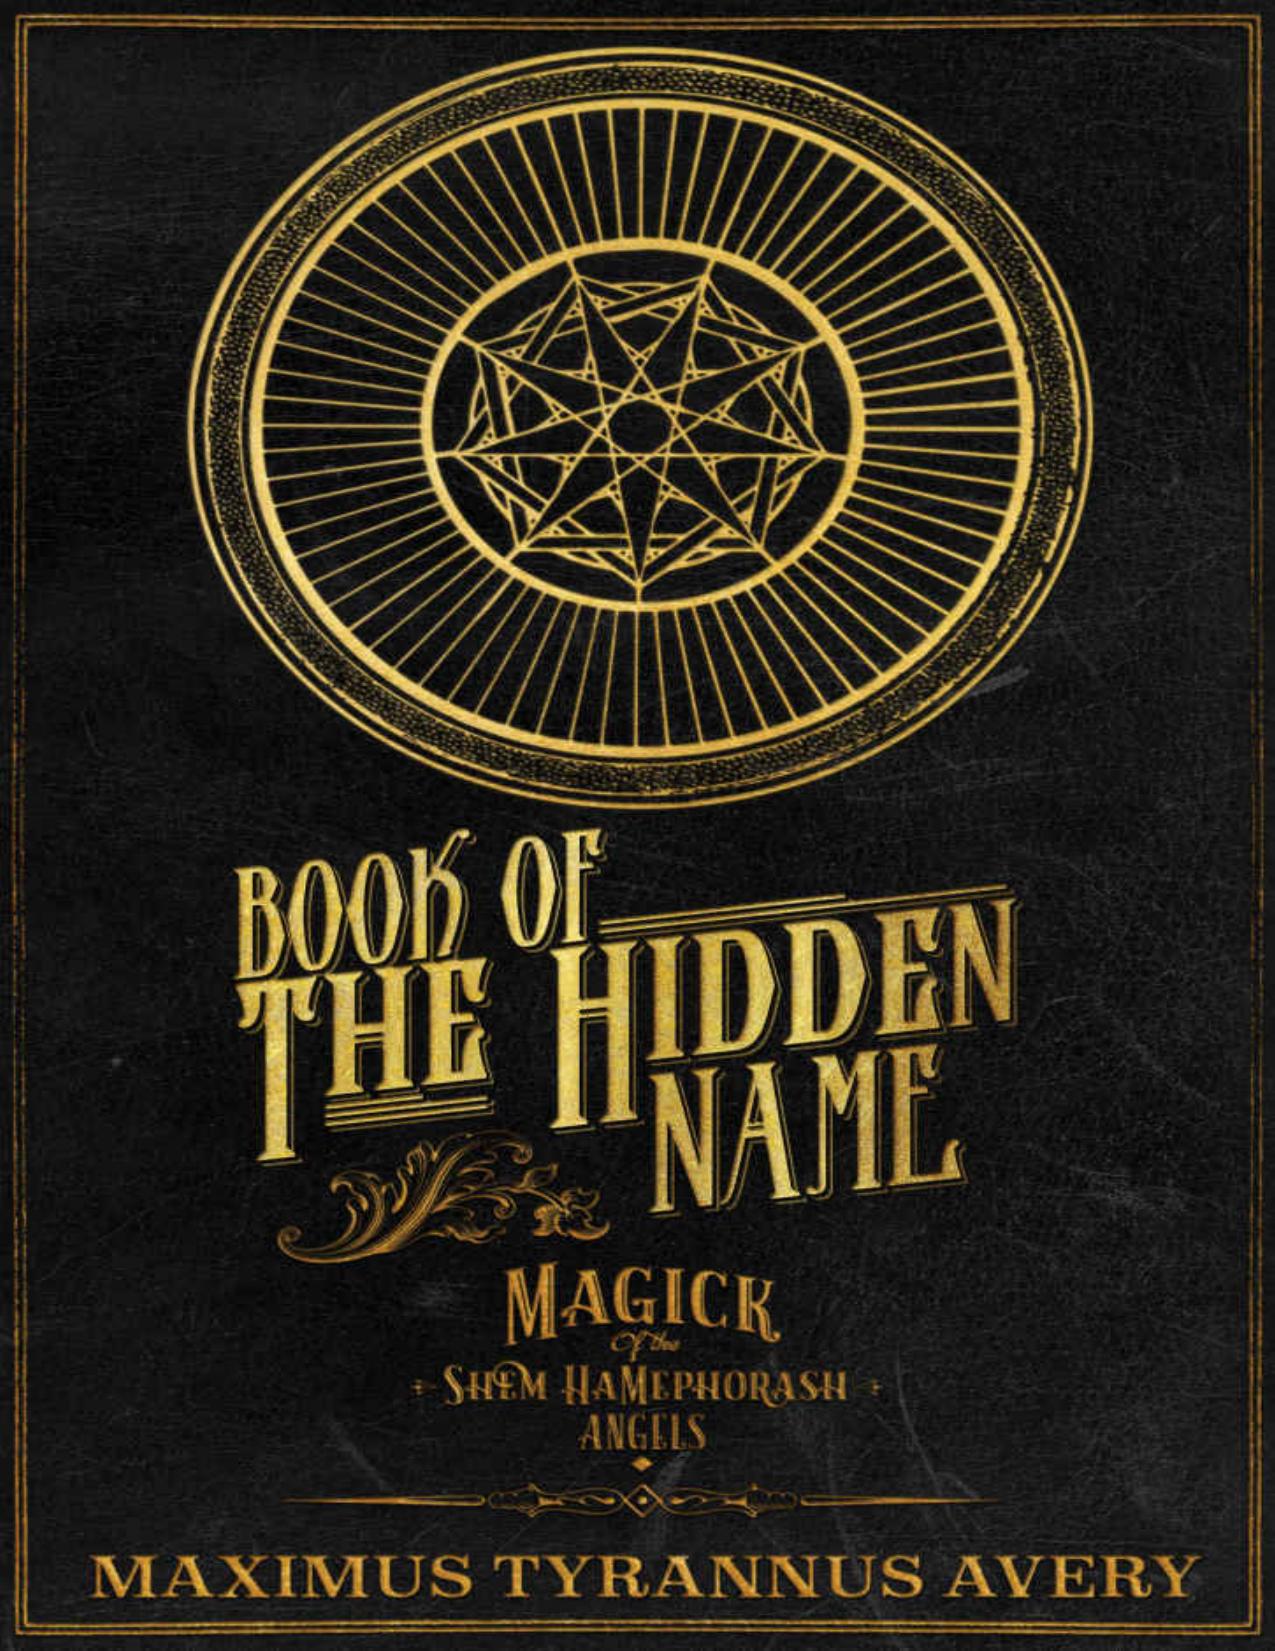 Book of the Hidden Name - Magick of the Shem HaMephorash Angels by Maximus Avery